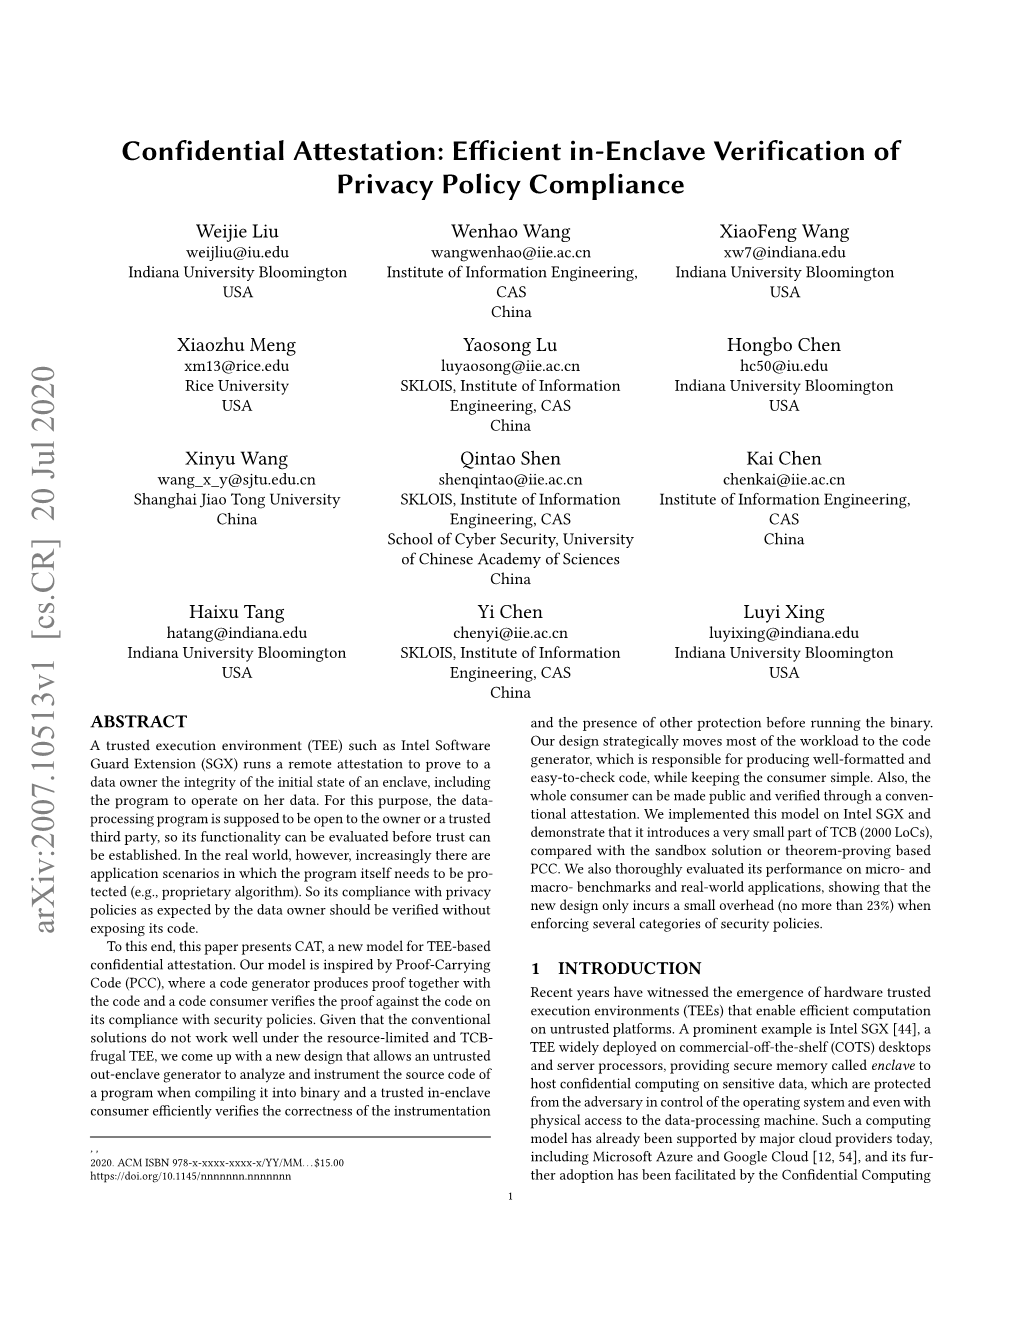 Confidential Attestation: Efficient In-Enclave Verification of Privacy Policy Compliance